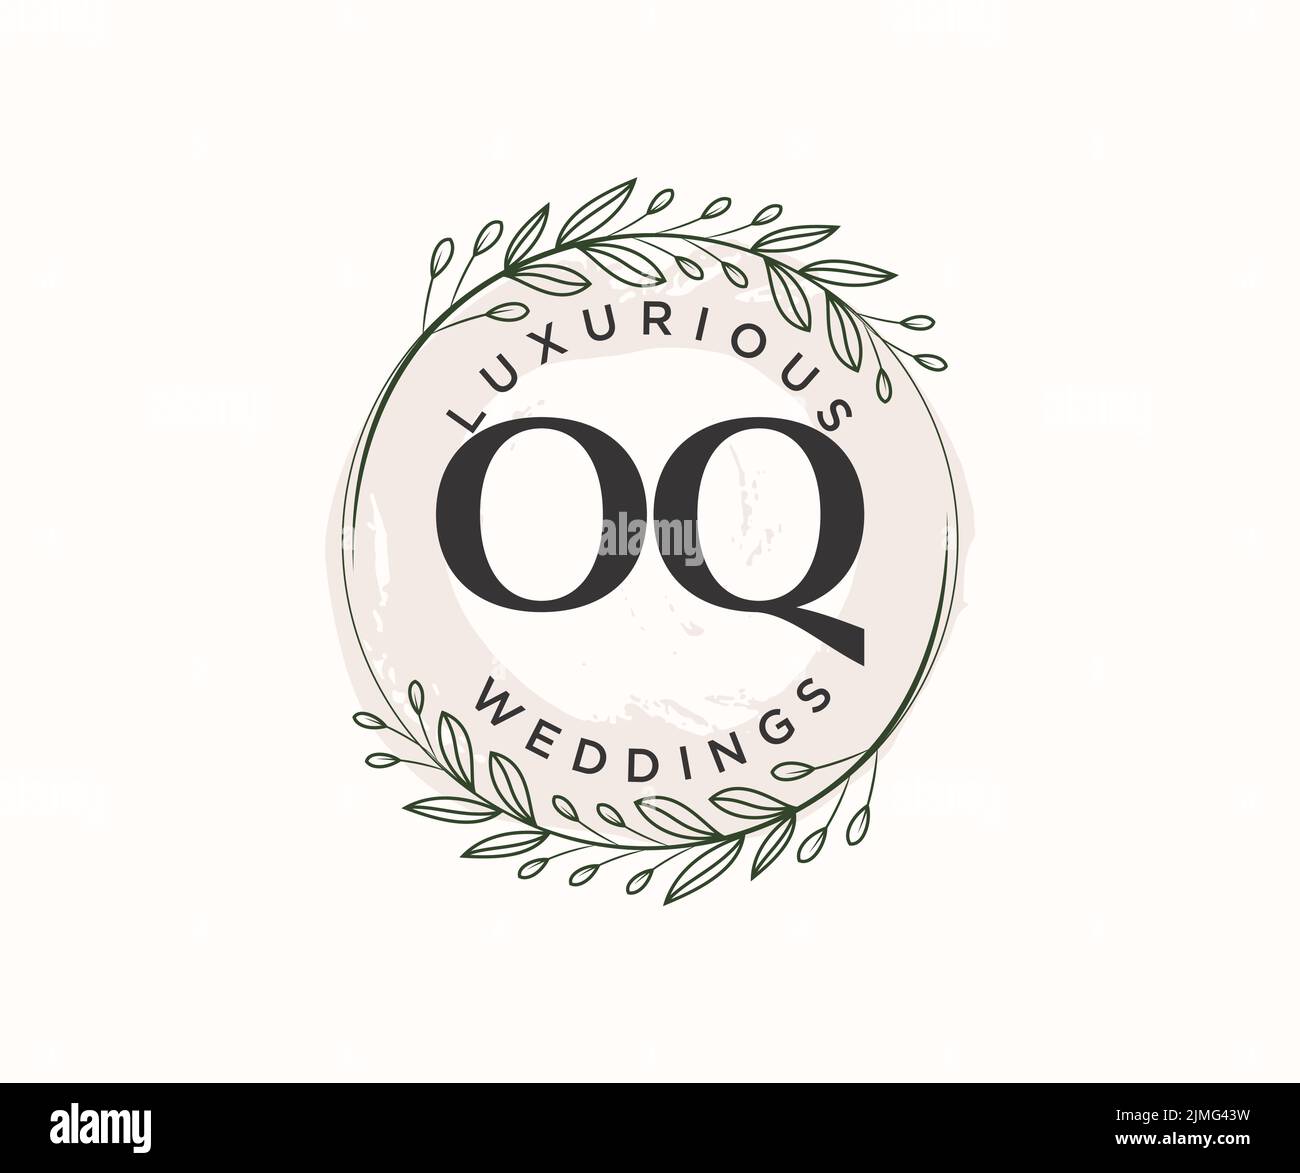 OQ Initials letter Wedding monogram logos template, hand drawn modern minimalistic and floral templates for Invitation cards, Save the Date, elegant Stock Vector